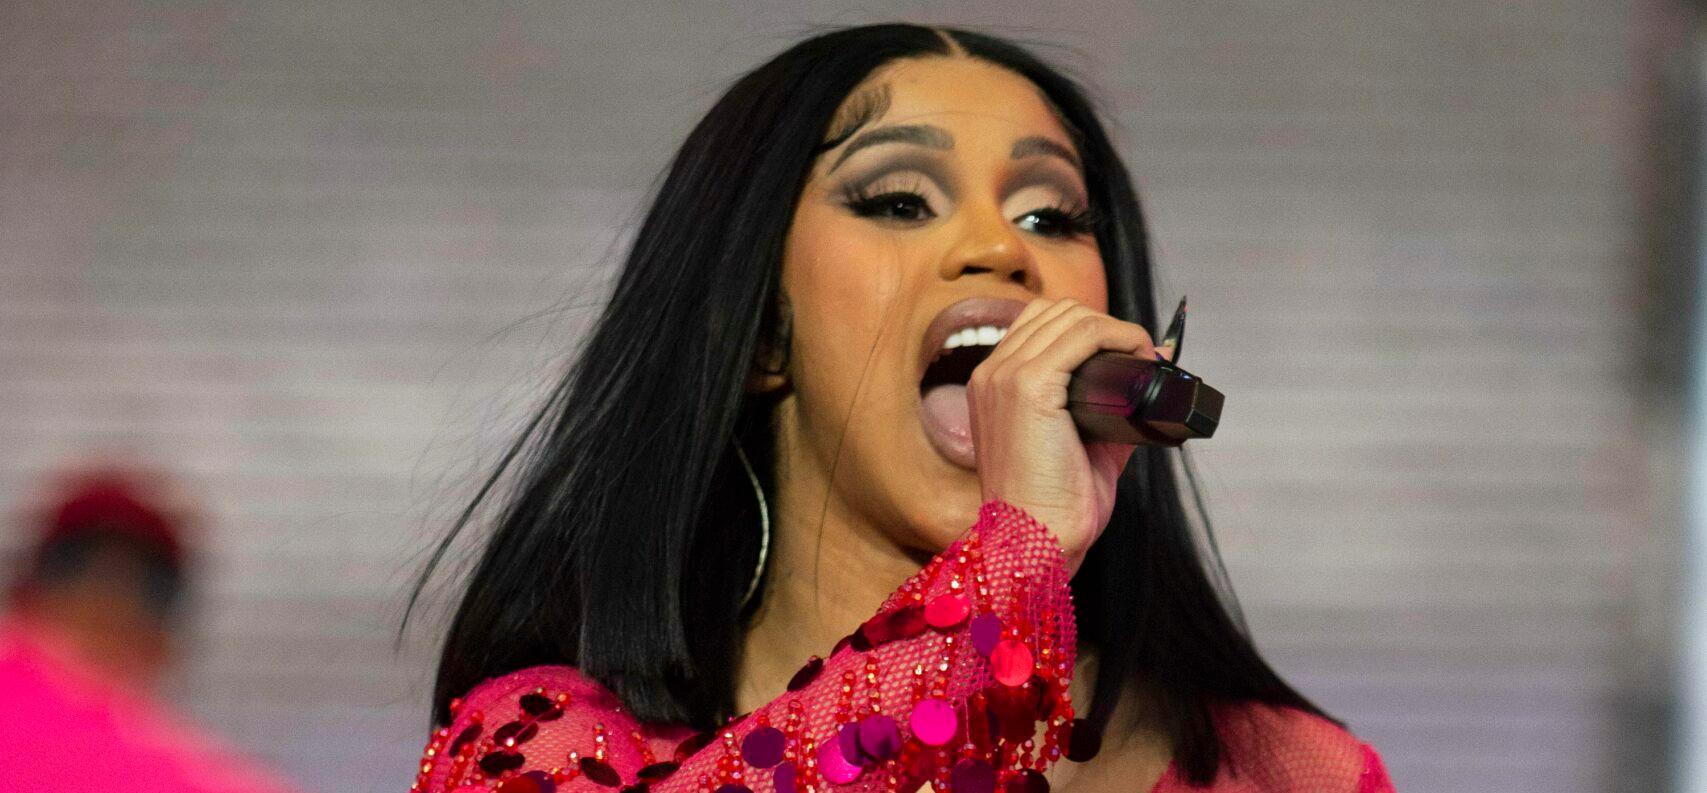 Cardi B seen performing at Wireless festival in London